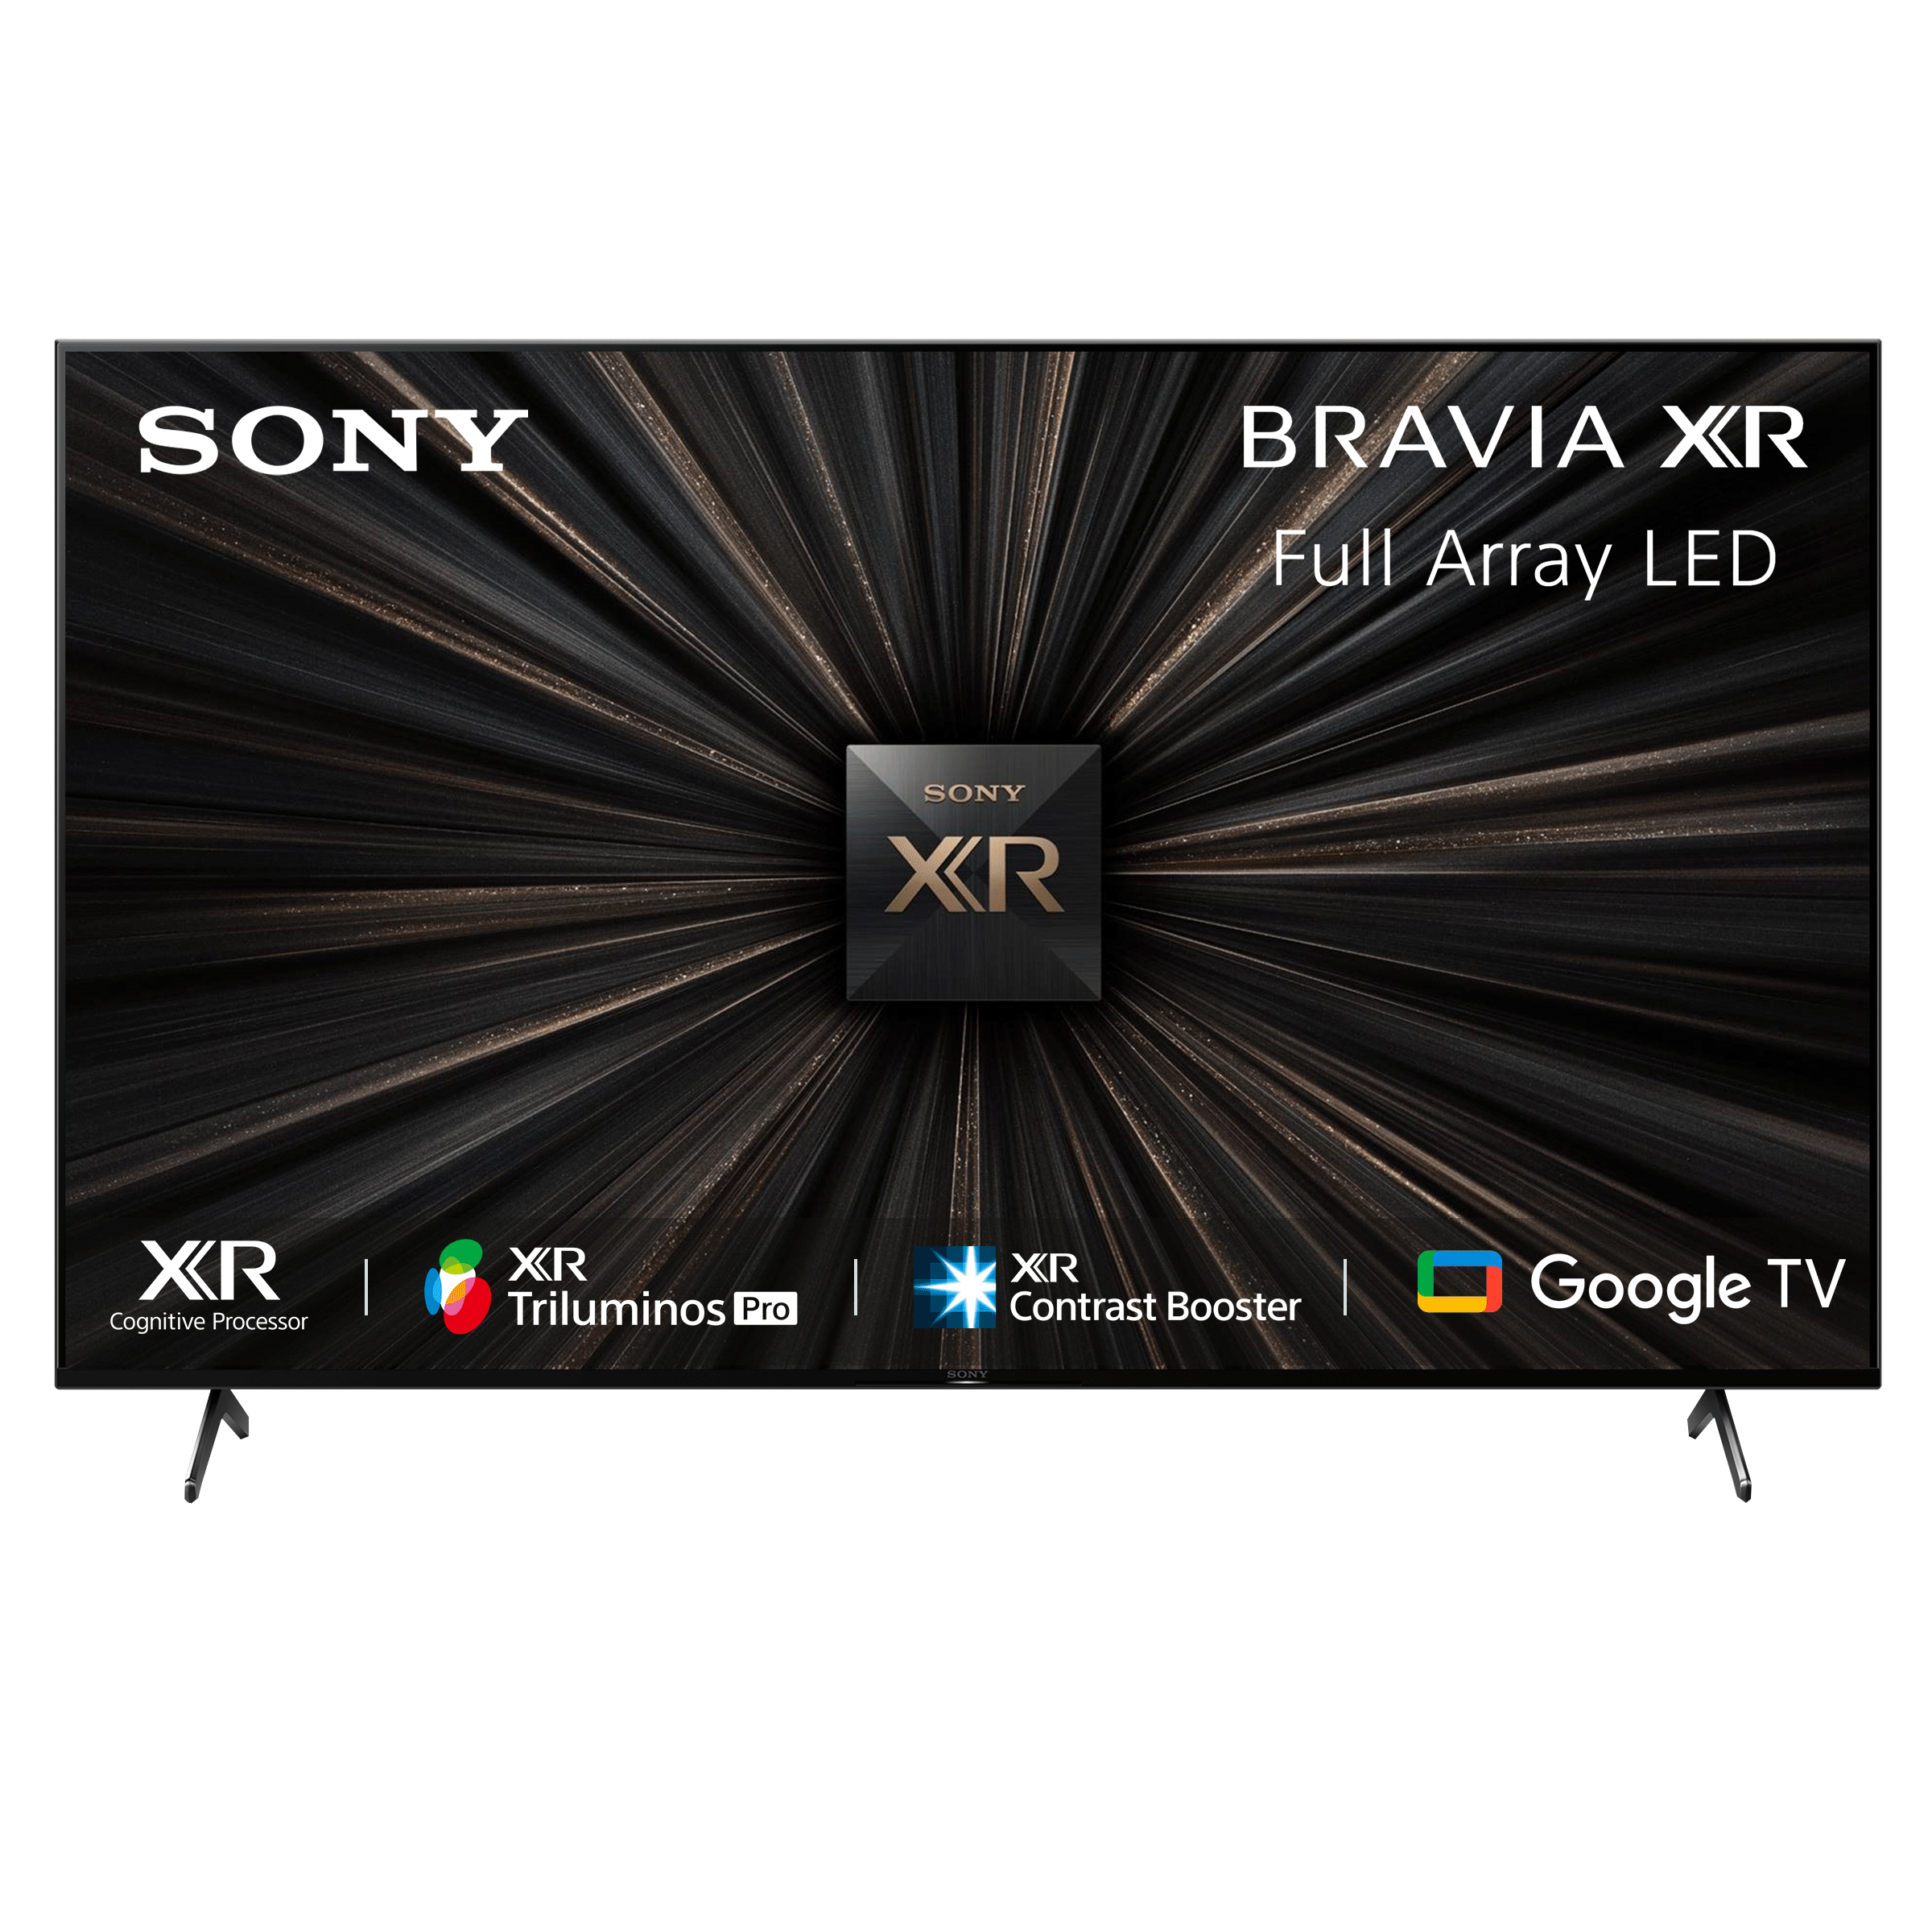 SONY Bravia XR X90J 189 cm (75 inch) 4K Ultra HD LED Android TV with Alexa Compatibility (2021 model)_1